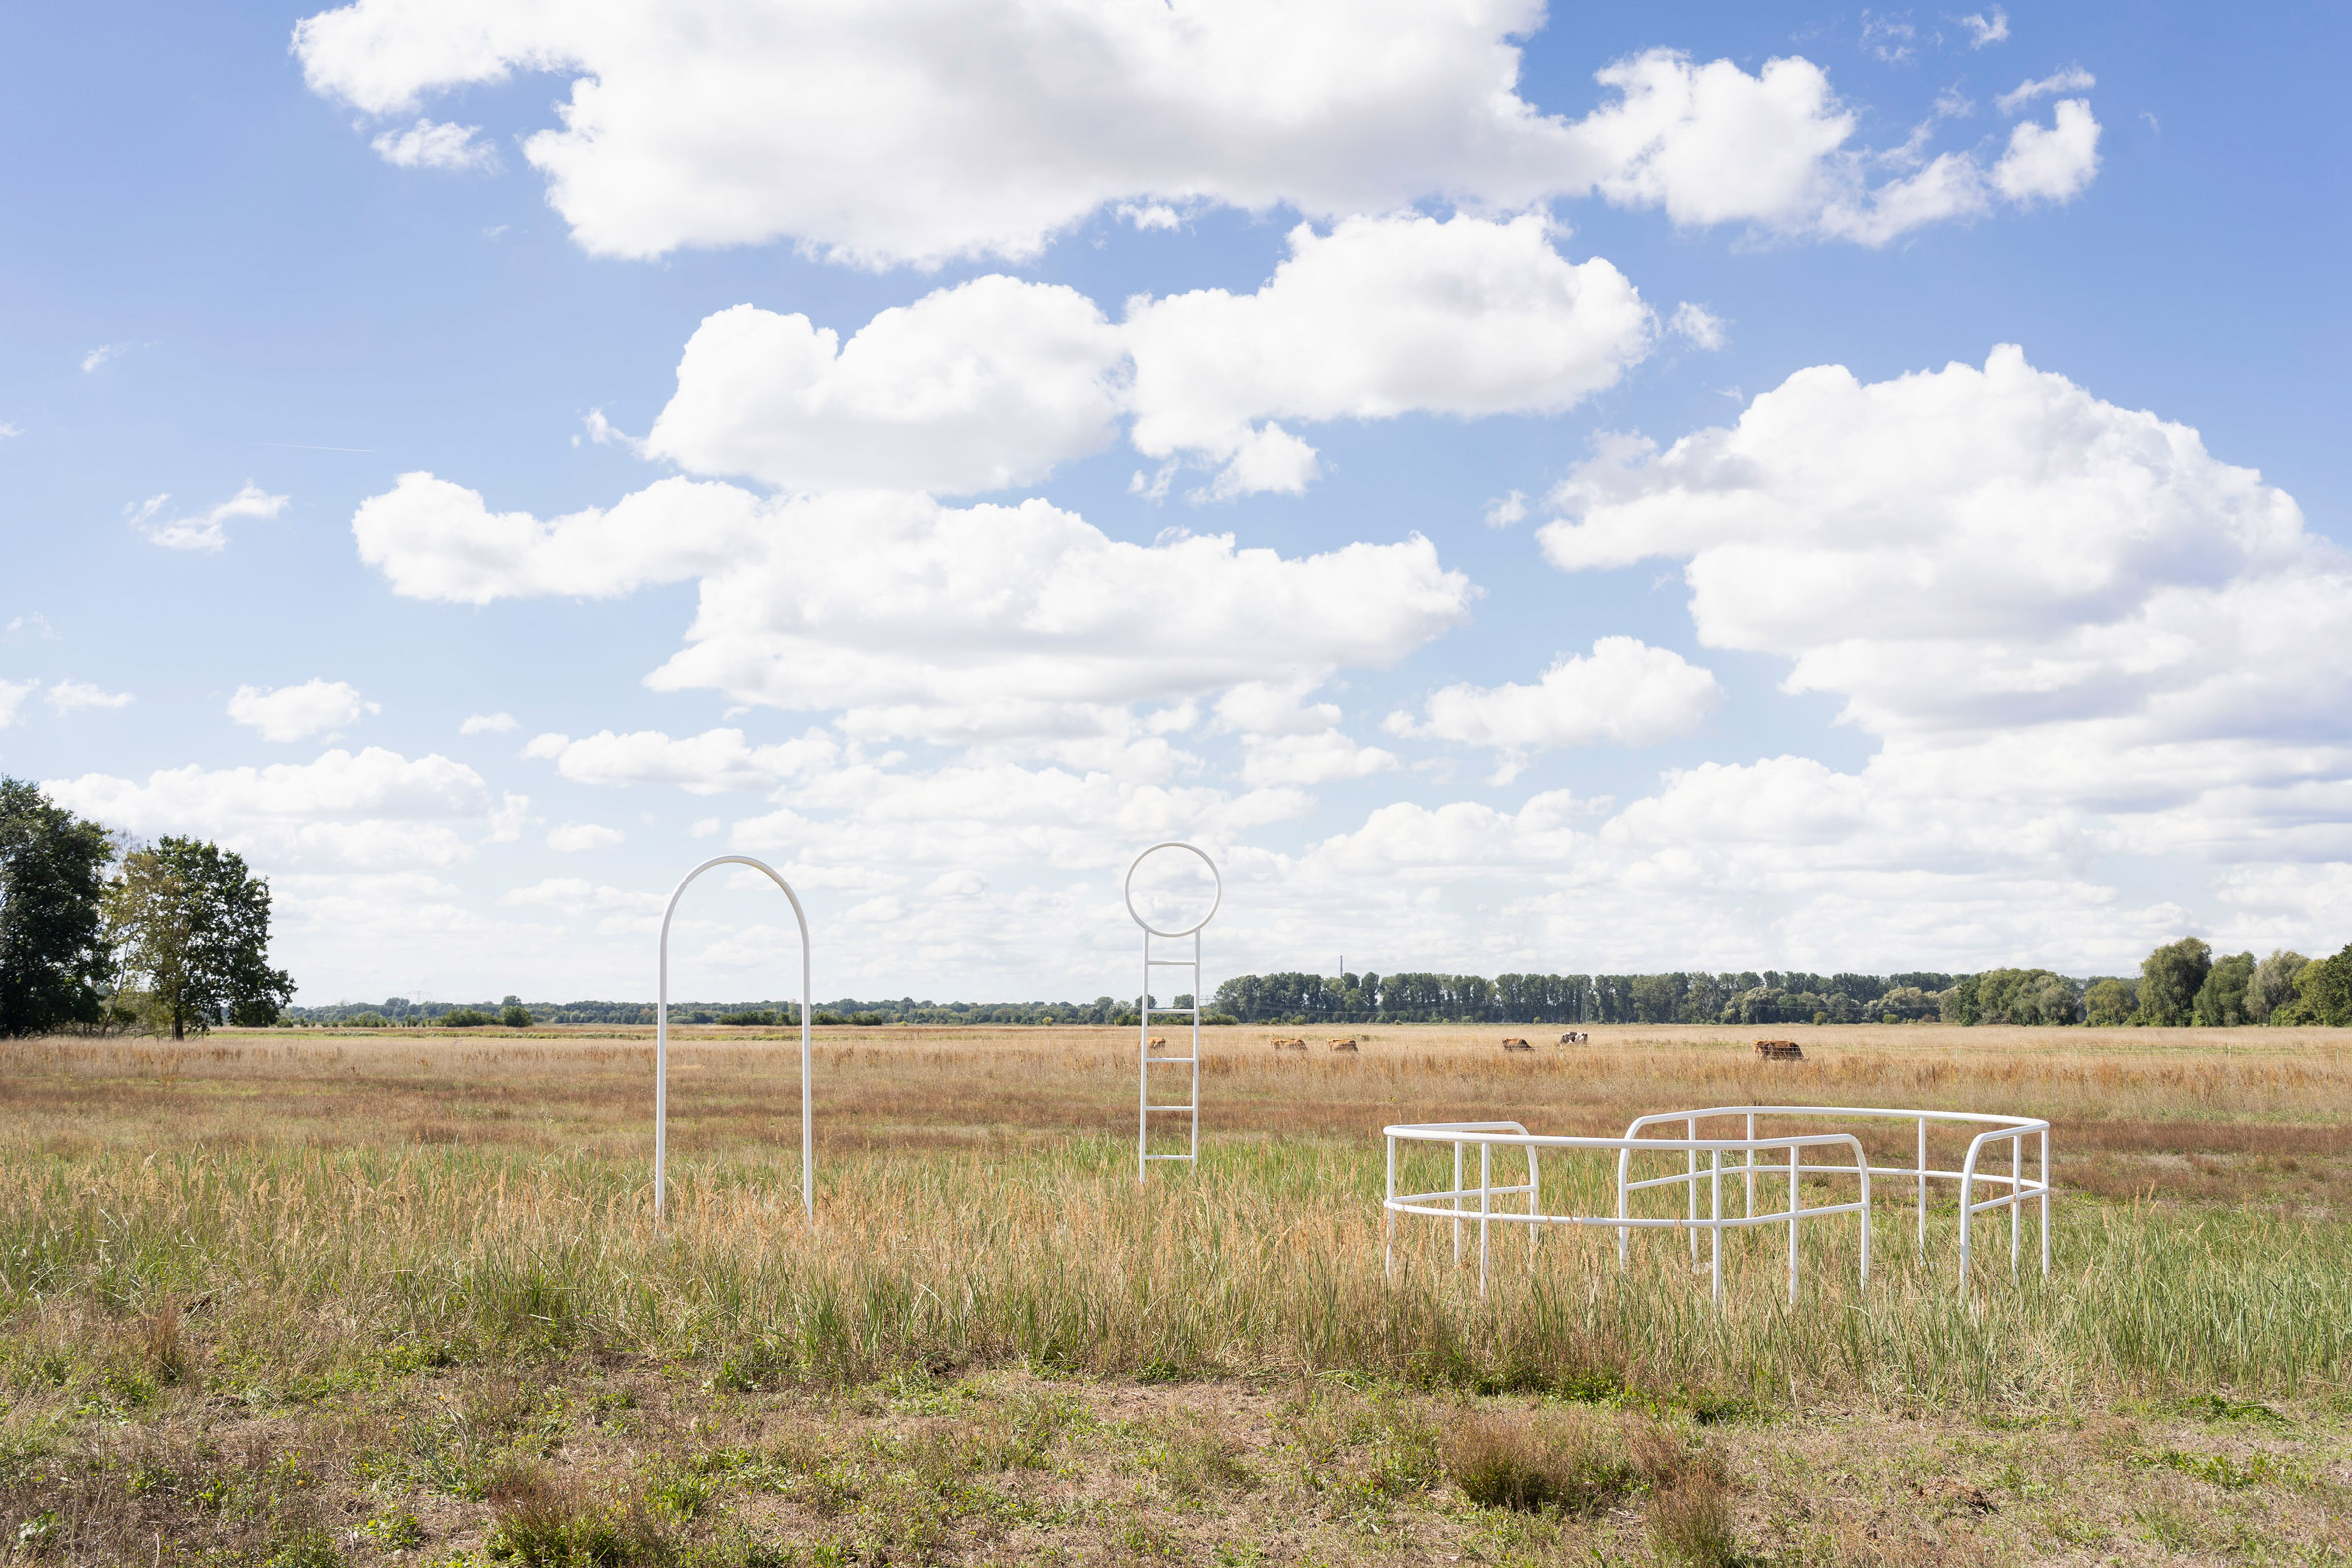 three white sculptures in fields by graduates of University of the Arts Berlin